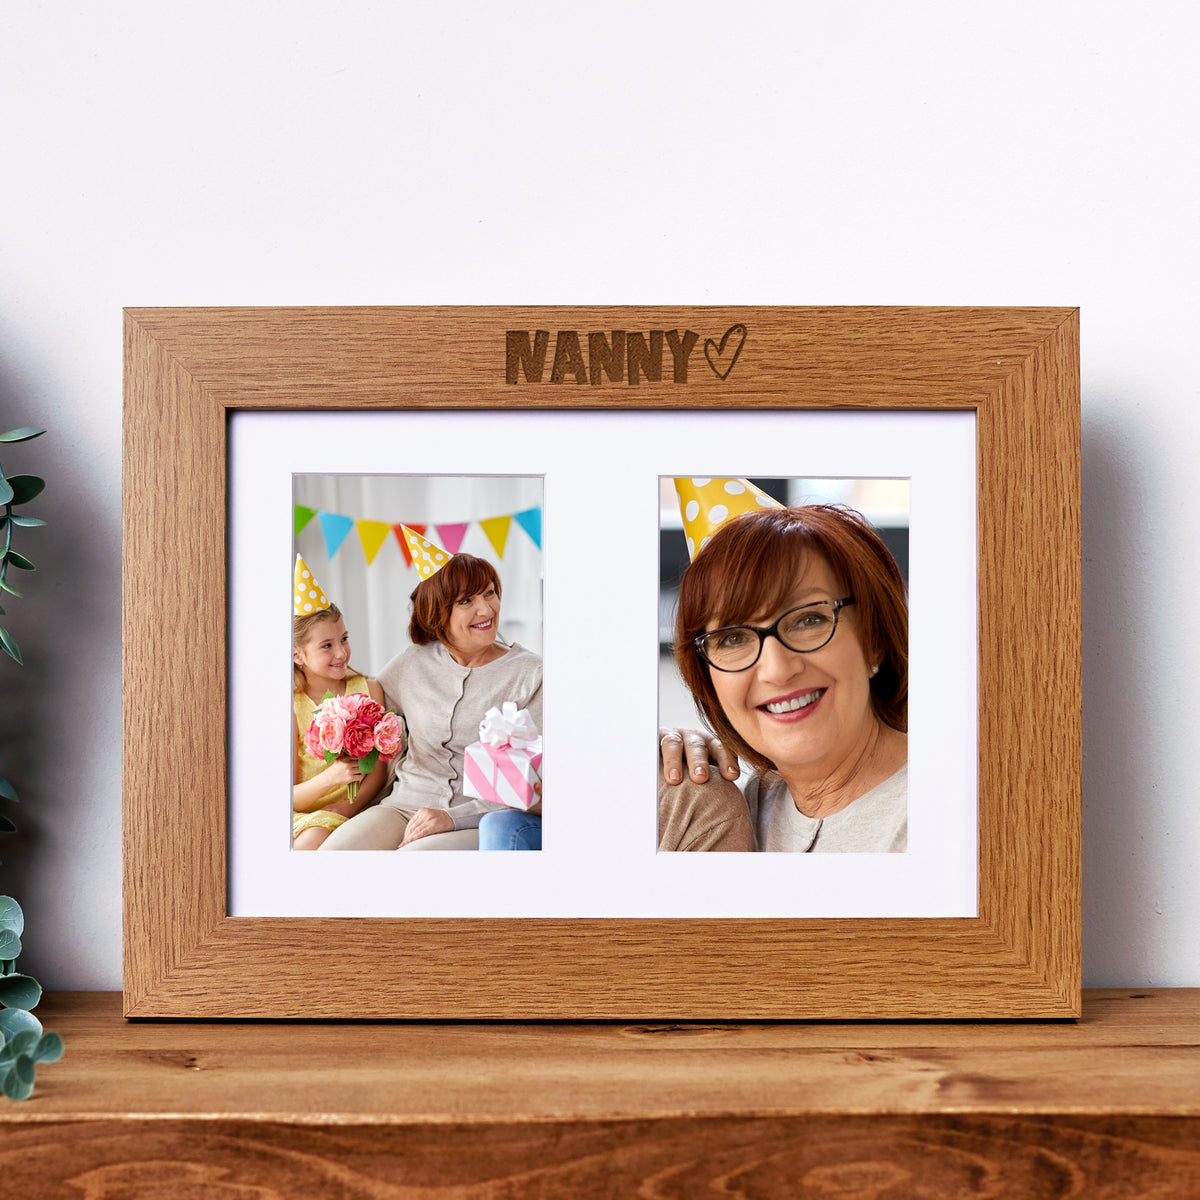 Nanny Photo Picture Frame Double 6x4 Inch